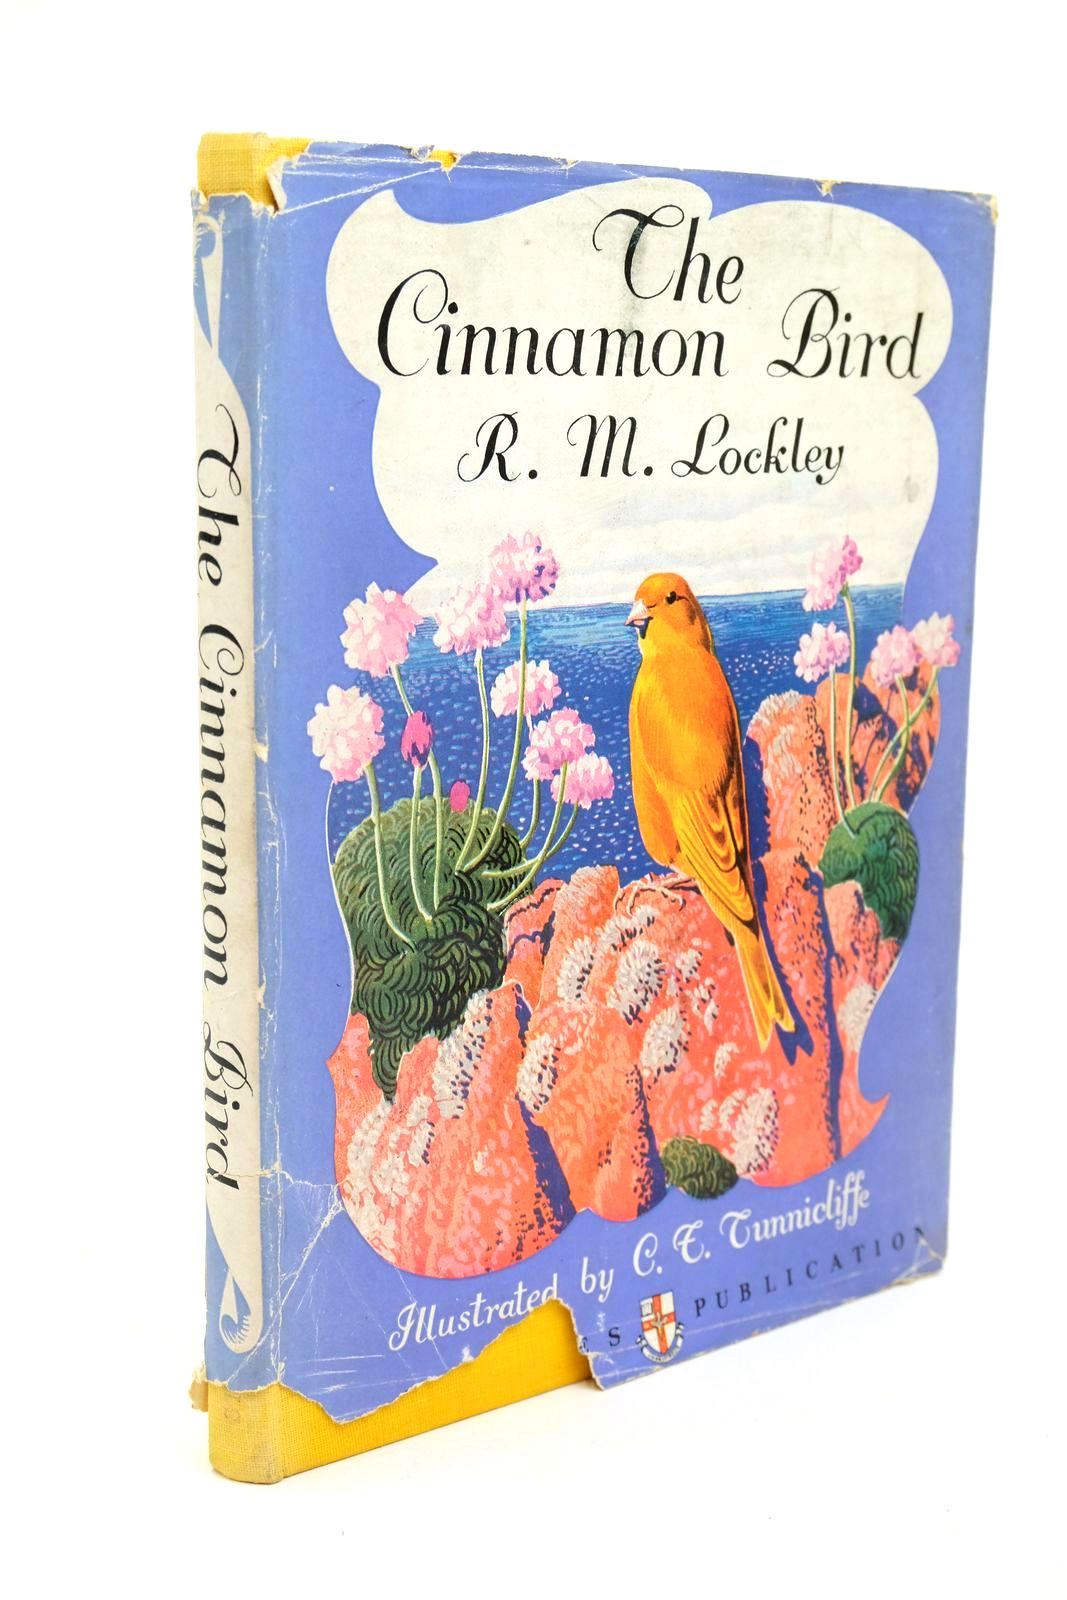 Photo of THE CINNAMON BIRD written by Lockley, Ronald M. illustrated by Tunnicliffe, C.F. published by Staples Press (STOCK CODE: 1322921)  for sale by Stella & Rose's Books